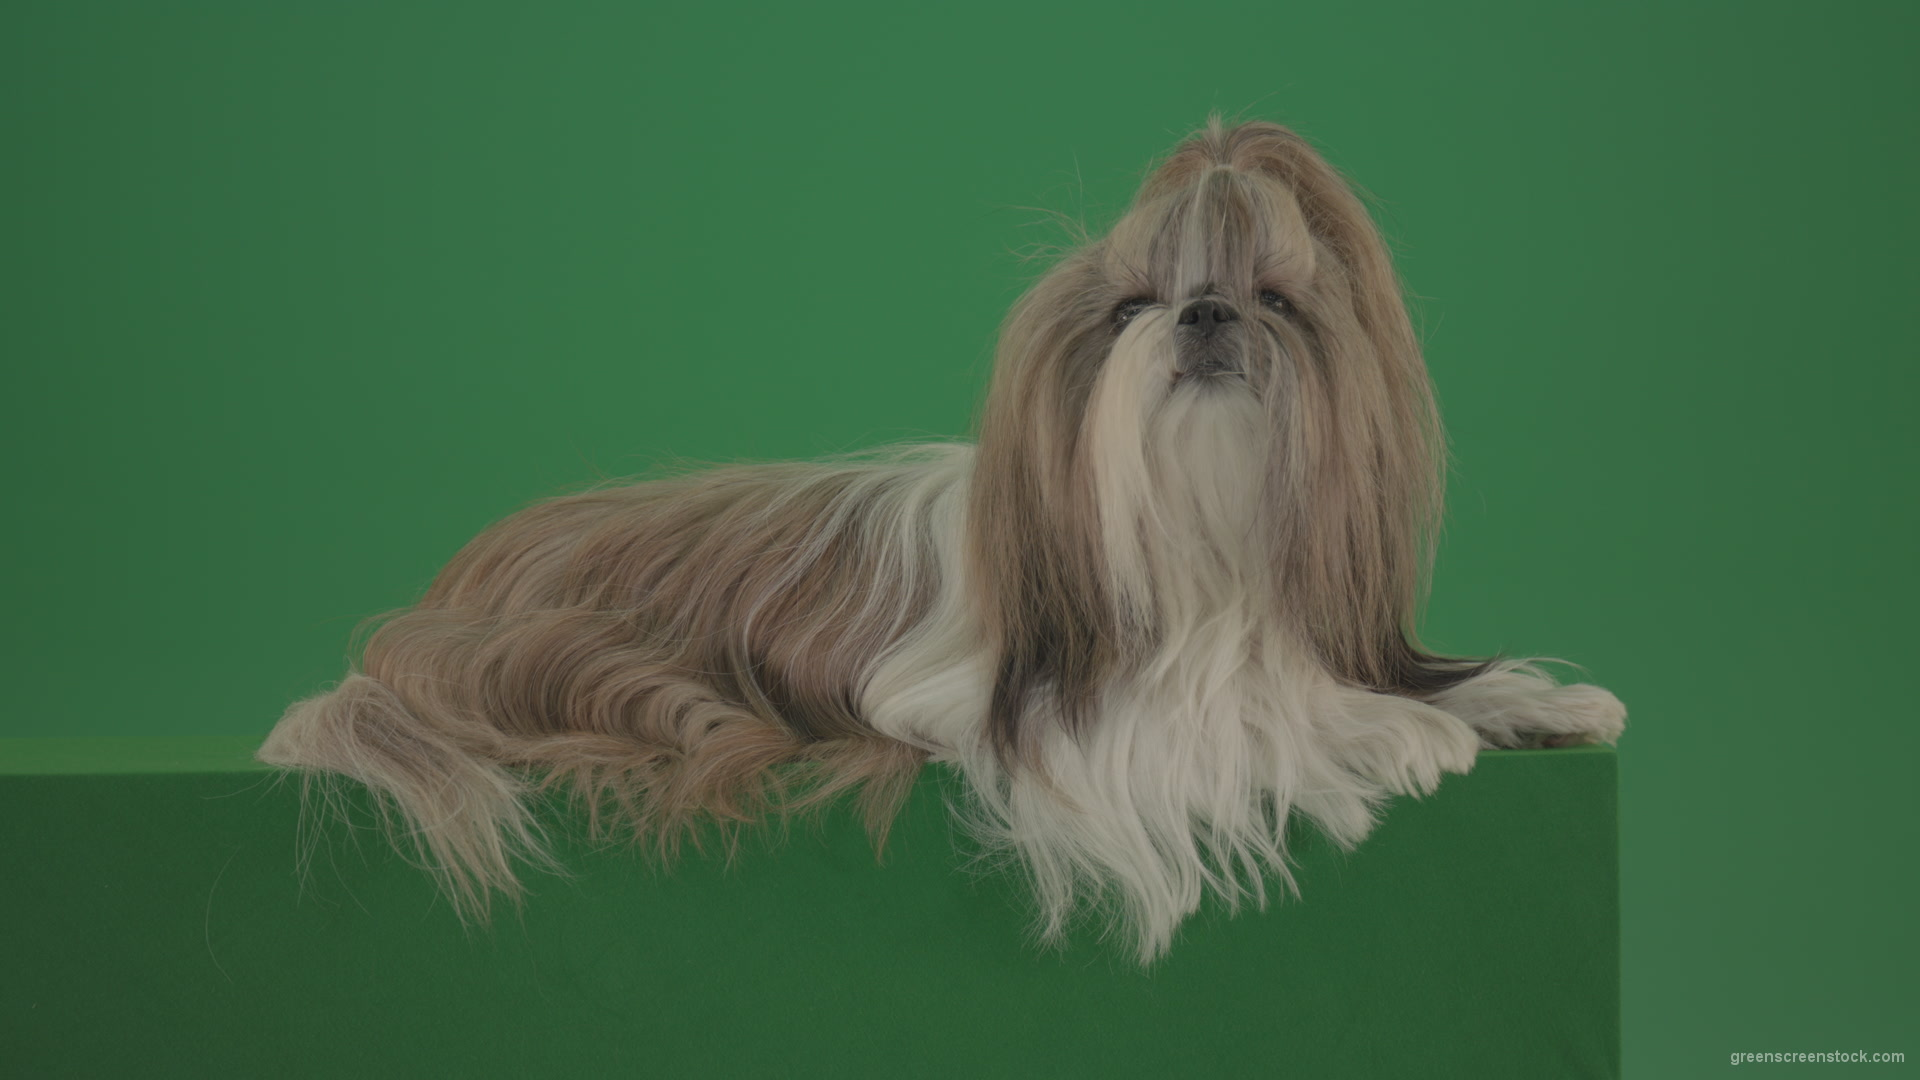 Fashion-luxury-toy-dog-Shihtzu-chilling-on-green-screen-isolated-background-4K_007 Green Screen Stock